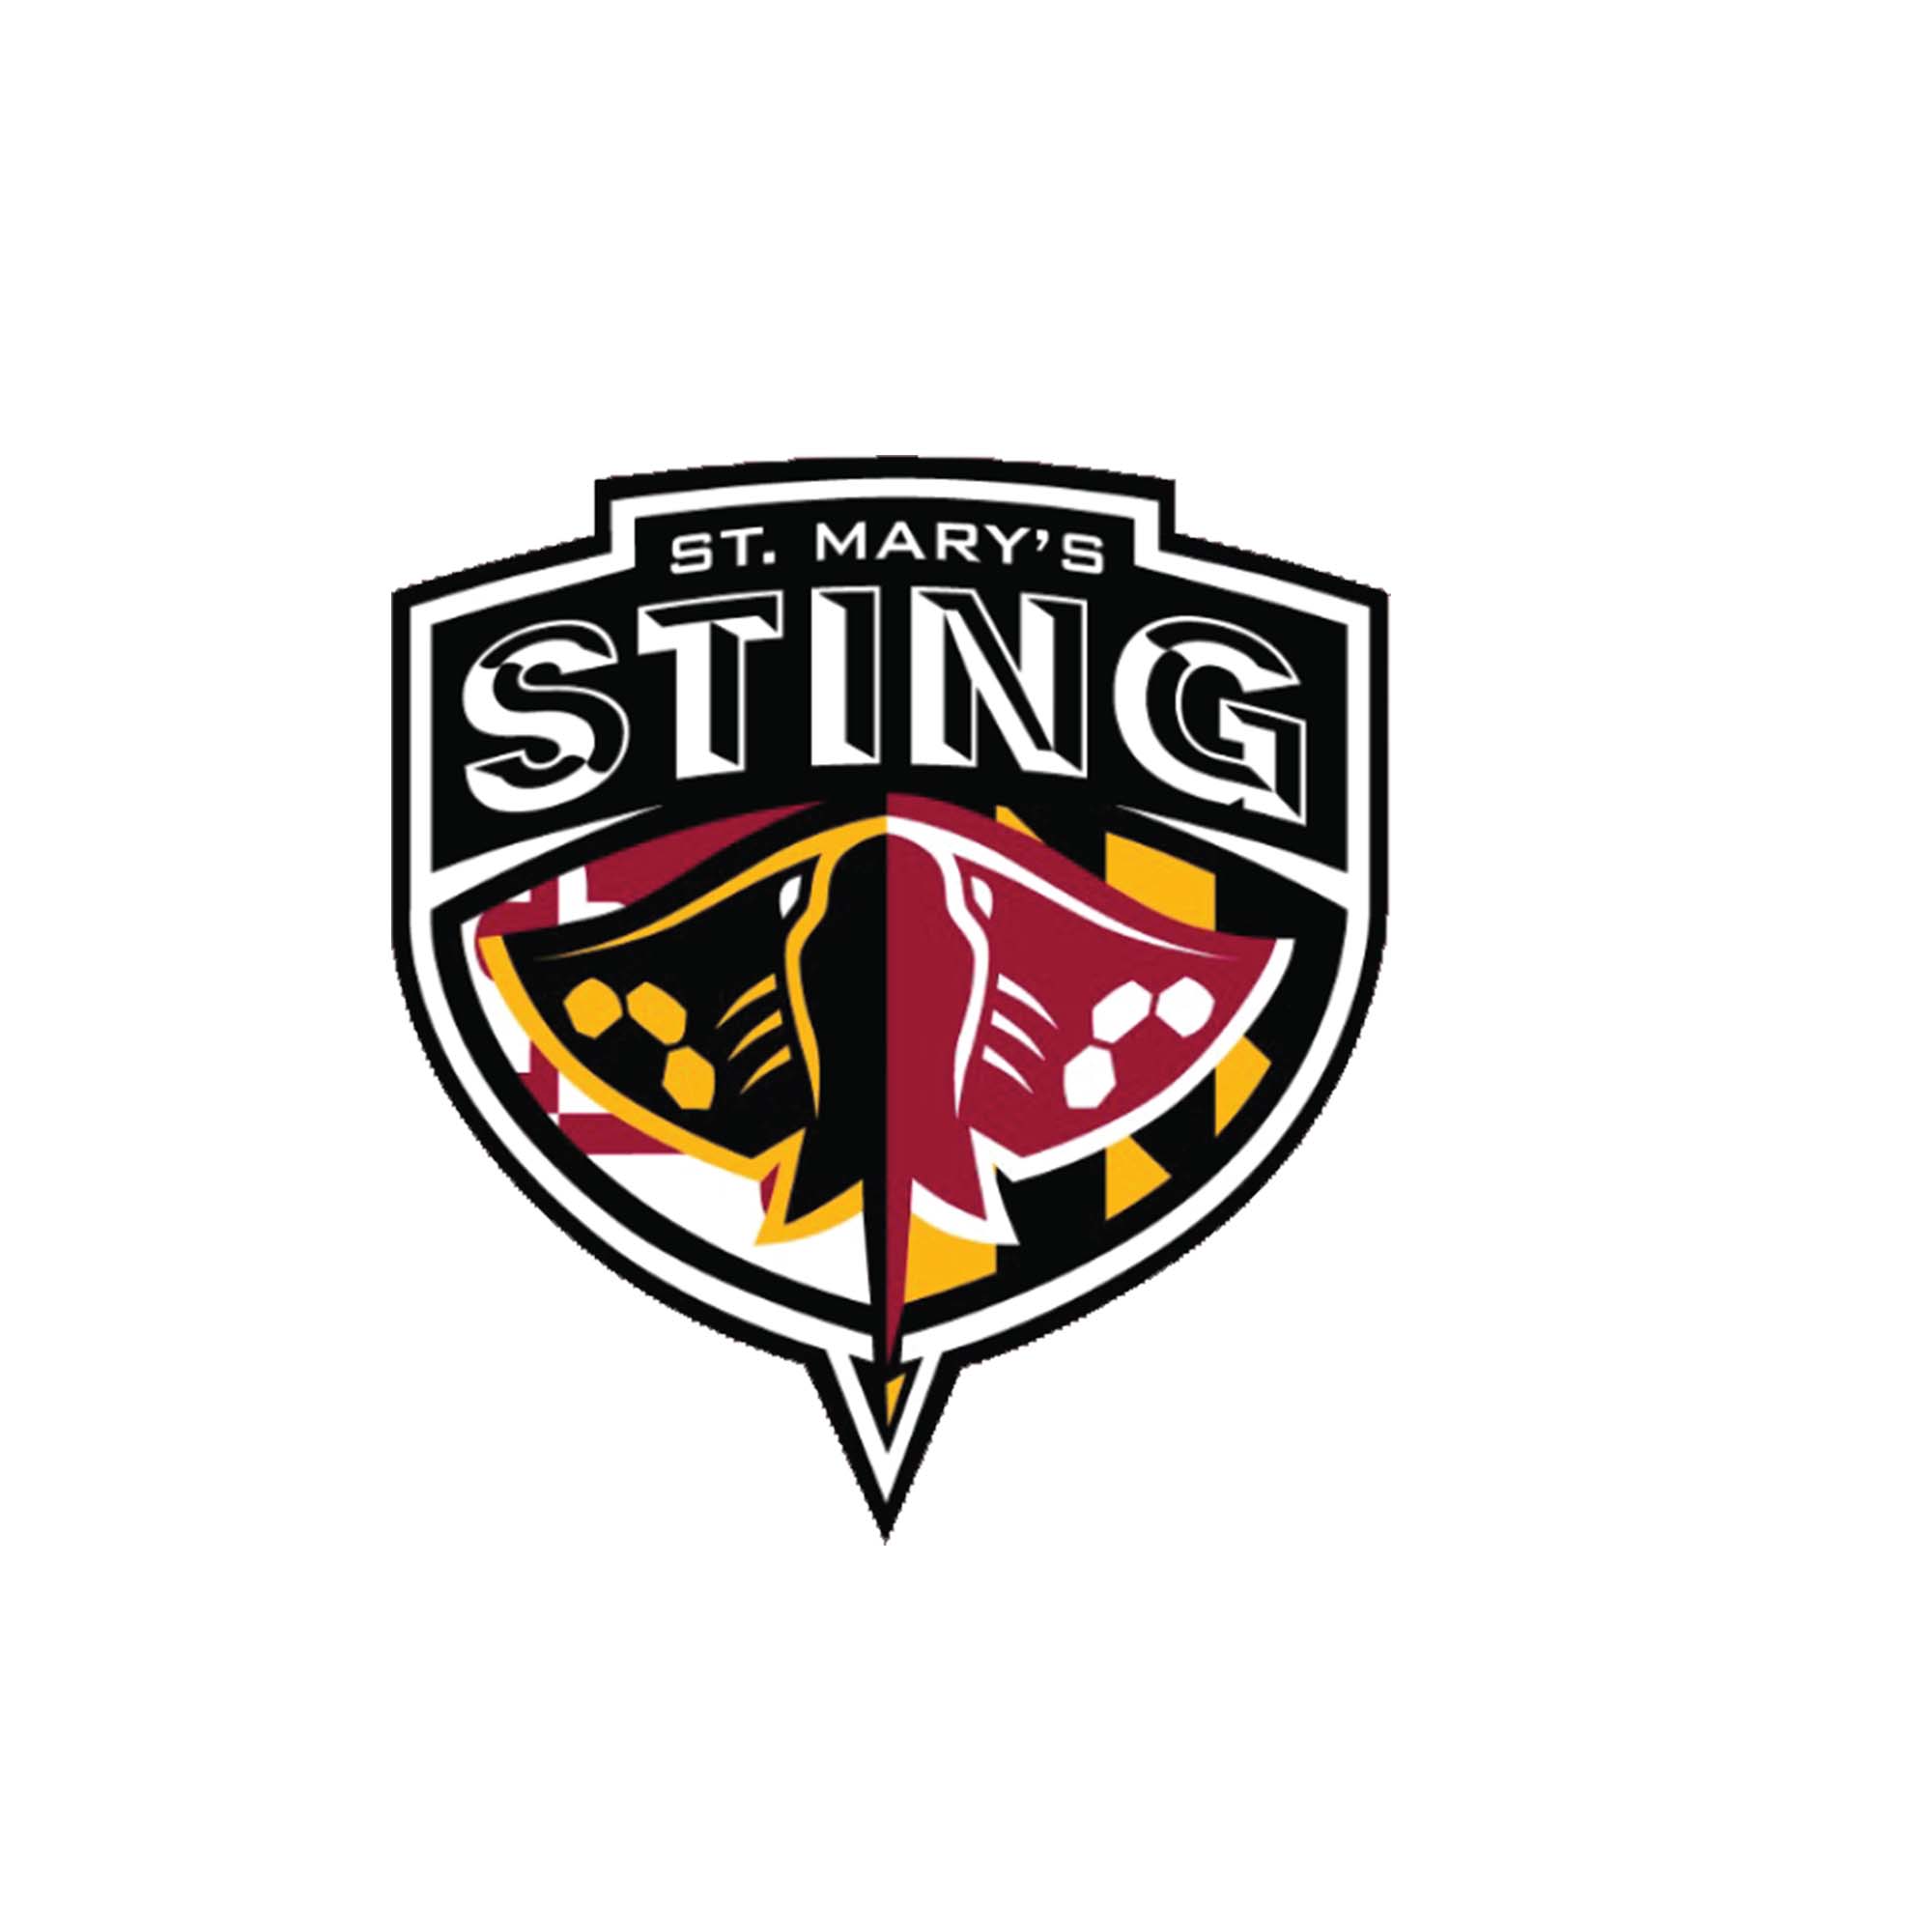 St Mary's Sting